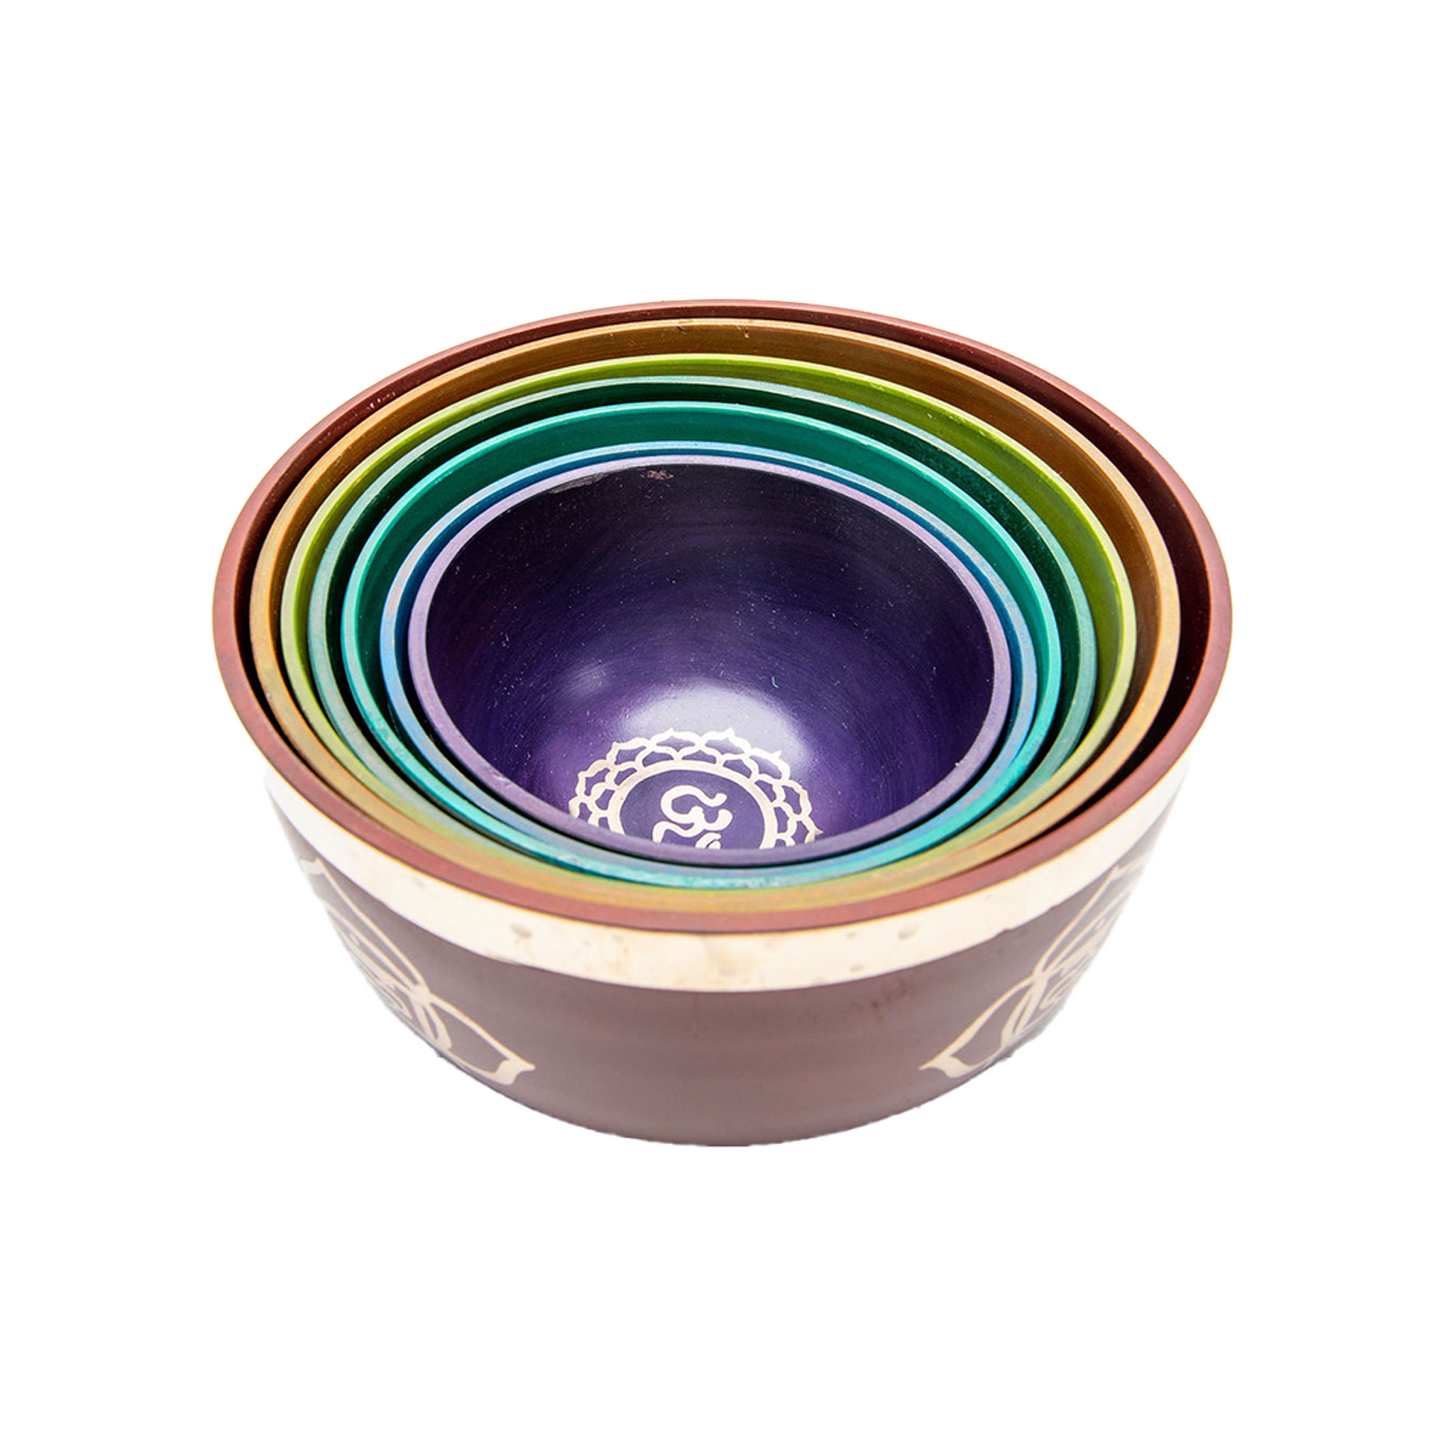 The Chakra 7 Bowl Set is nested together inside of the largest bowl on a white backdrop.